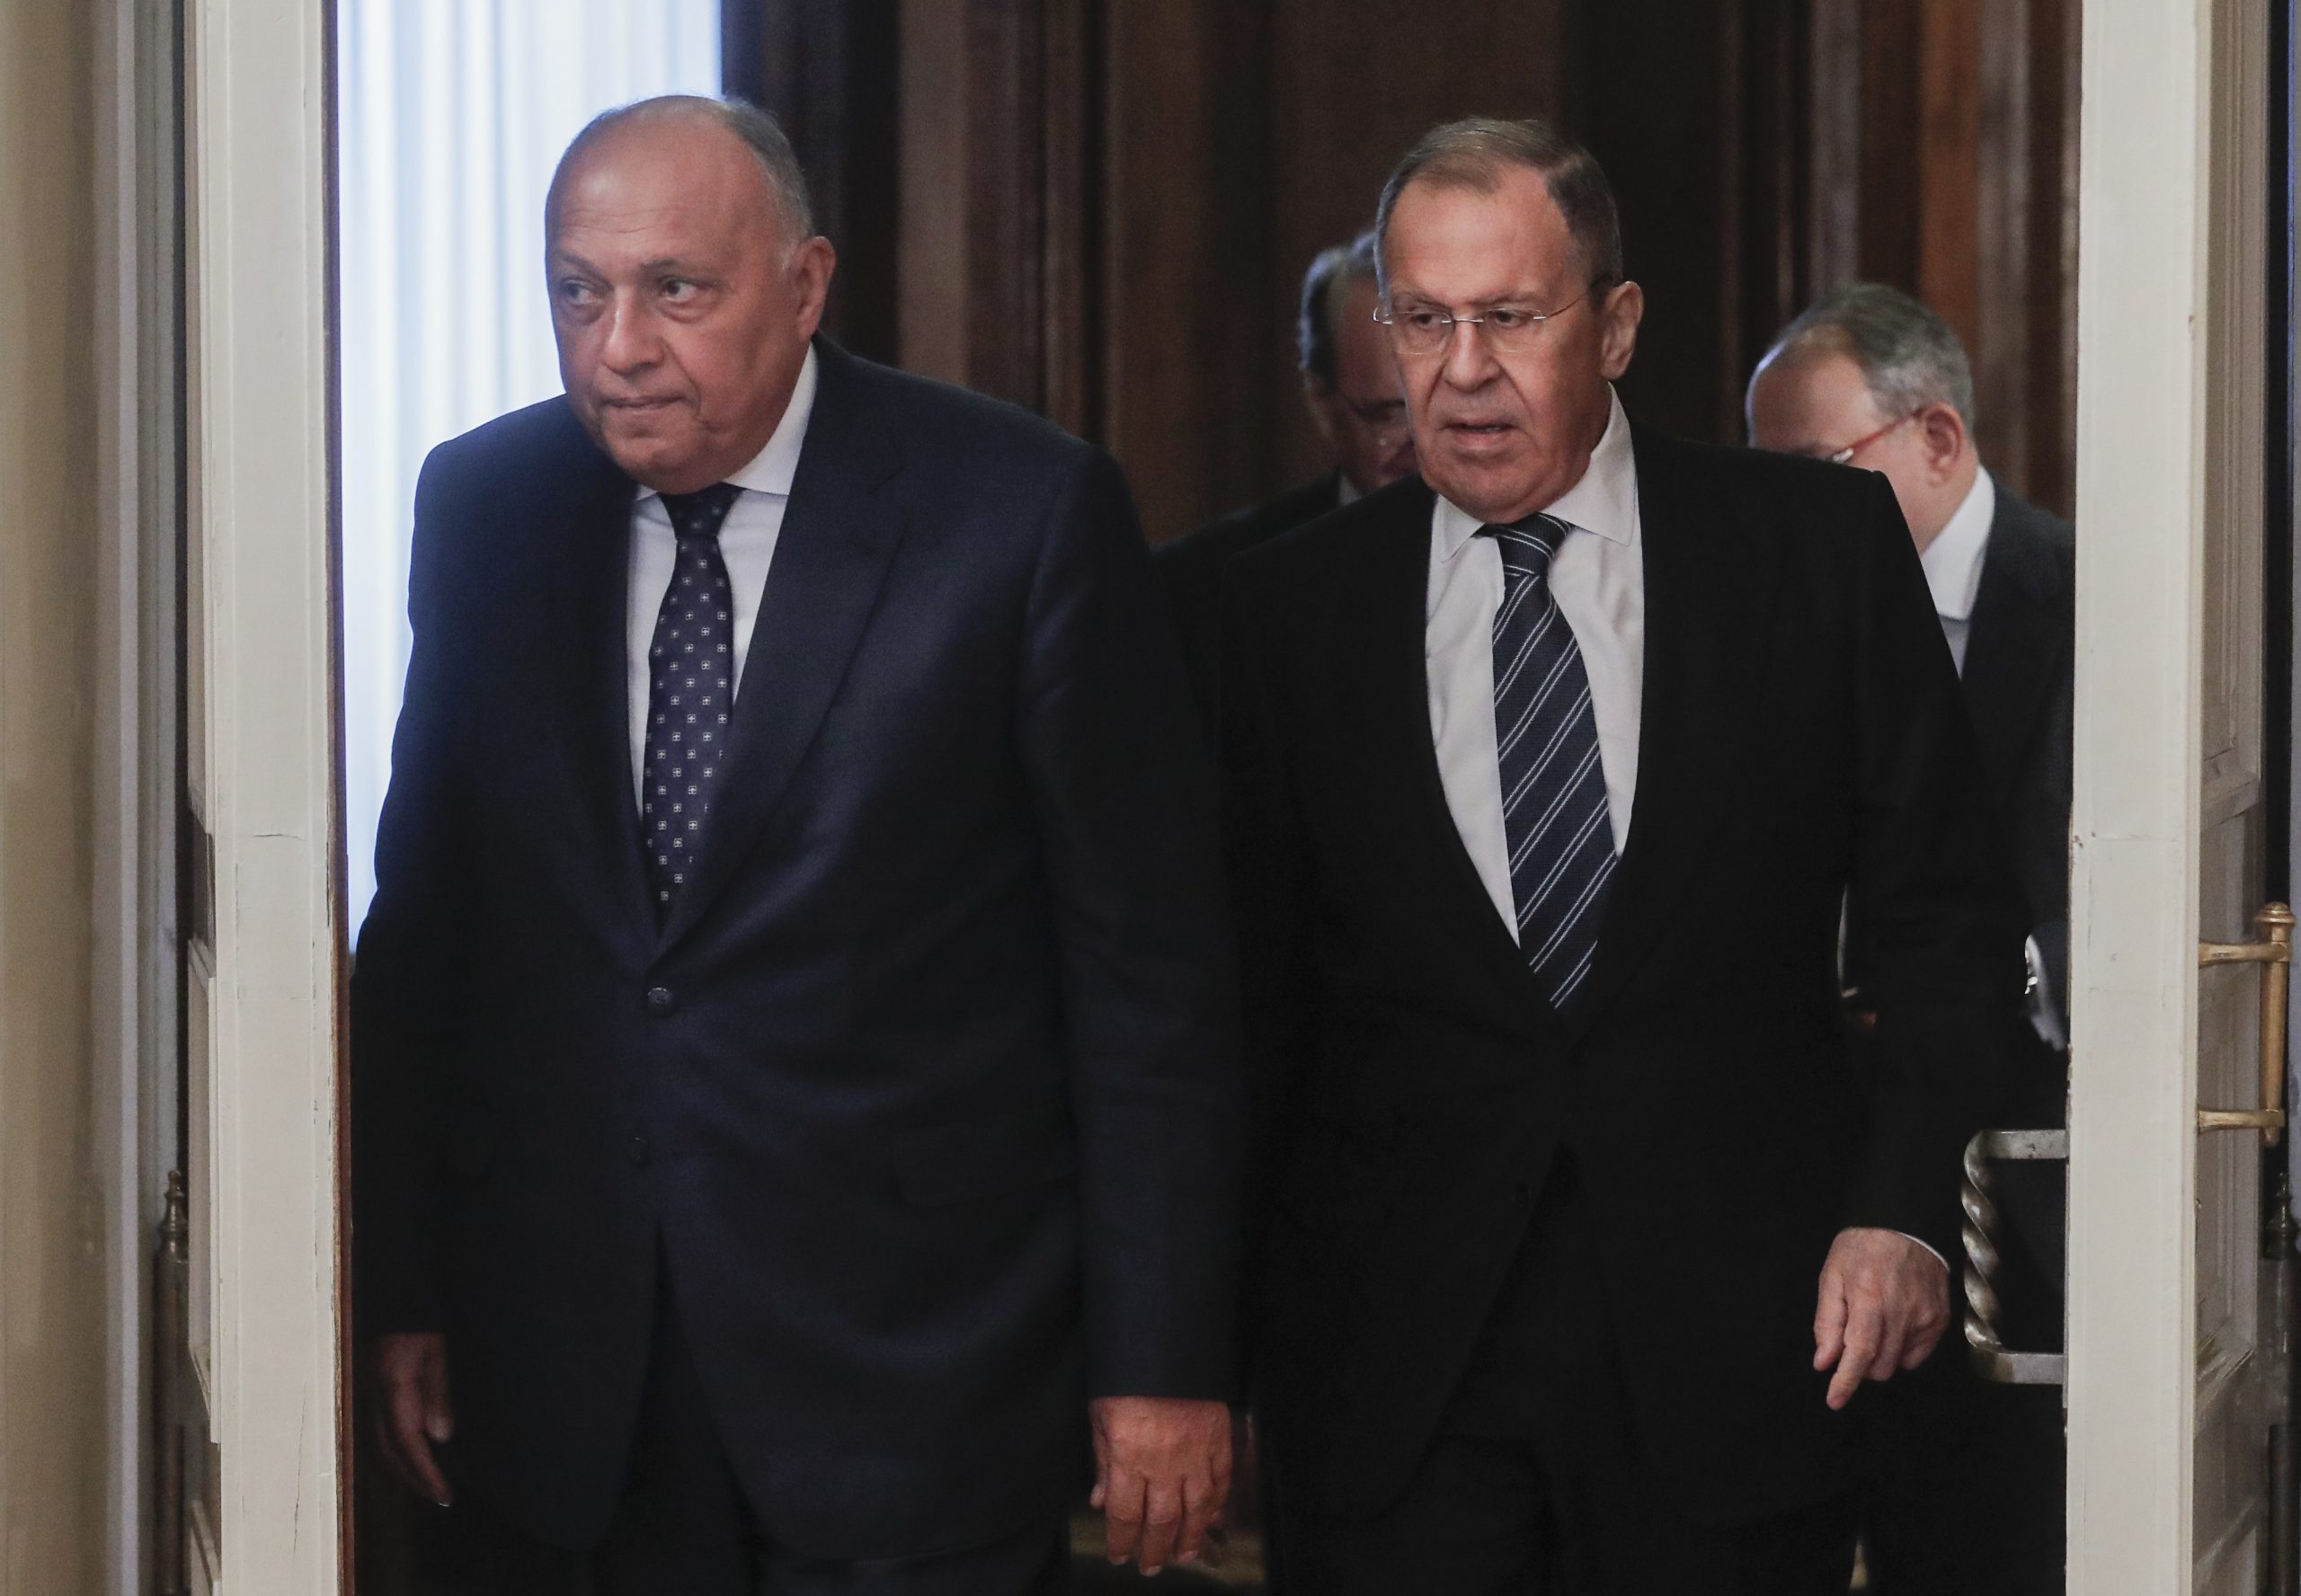 epa10440838 Russia's Foreign Minister Sergei Lavrov (R) and Egypt's Foreign Minister Sameh Shoukry (L) arrive for their meeting in Moscow, Russia, 31 January 2023. The meeting with Lavrov comes one day after Shoukry met US State Secretary Blinken in Cairo on 30 January.  EPA/MAXIM SHIPENKOV